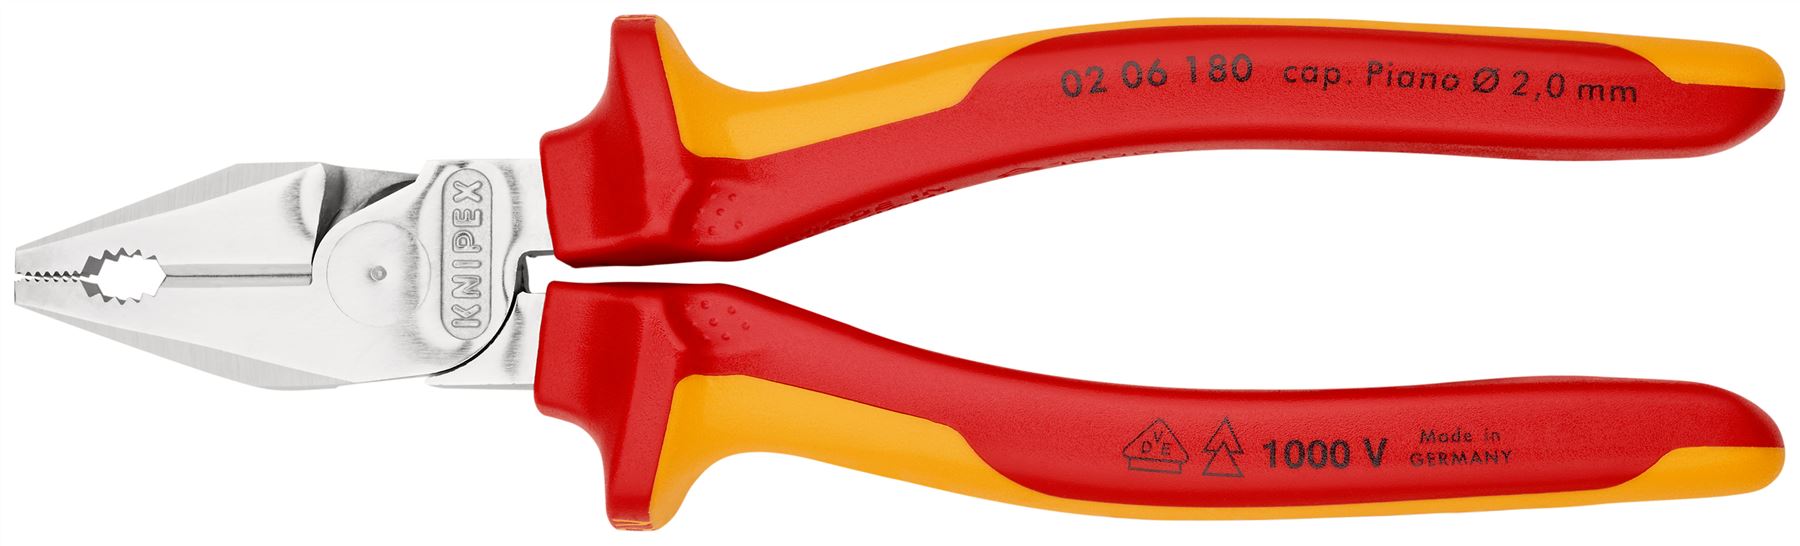 KNIPEX Combination Pliers High Leverage 180mm VDE Multi Component Grips 02 06 180